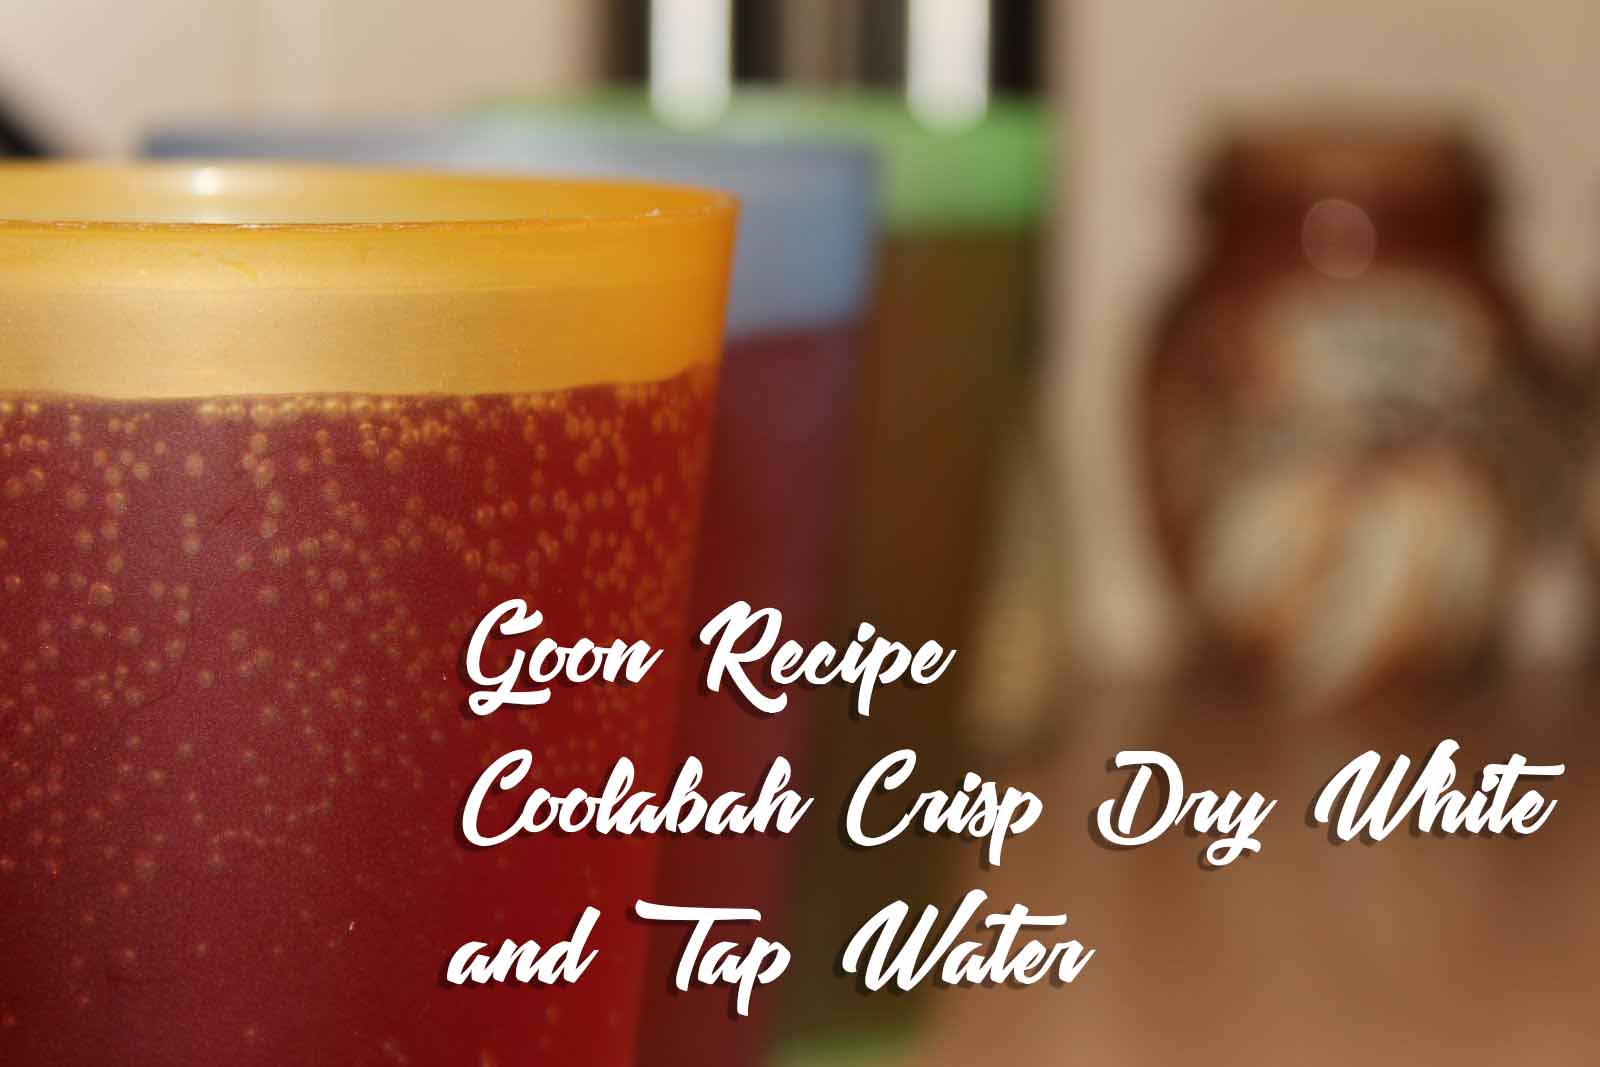 Coolabah_Crisp_Dry_White_and_Tap_Water_Goon_Recipe